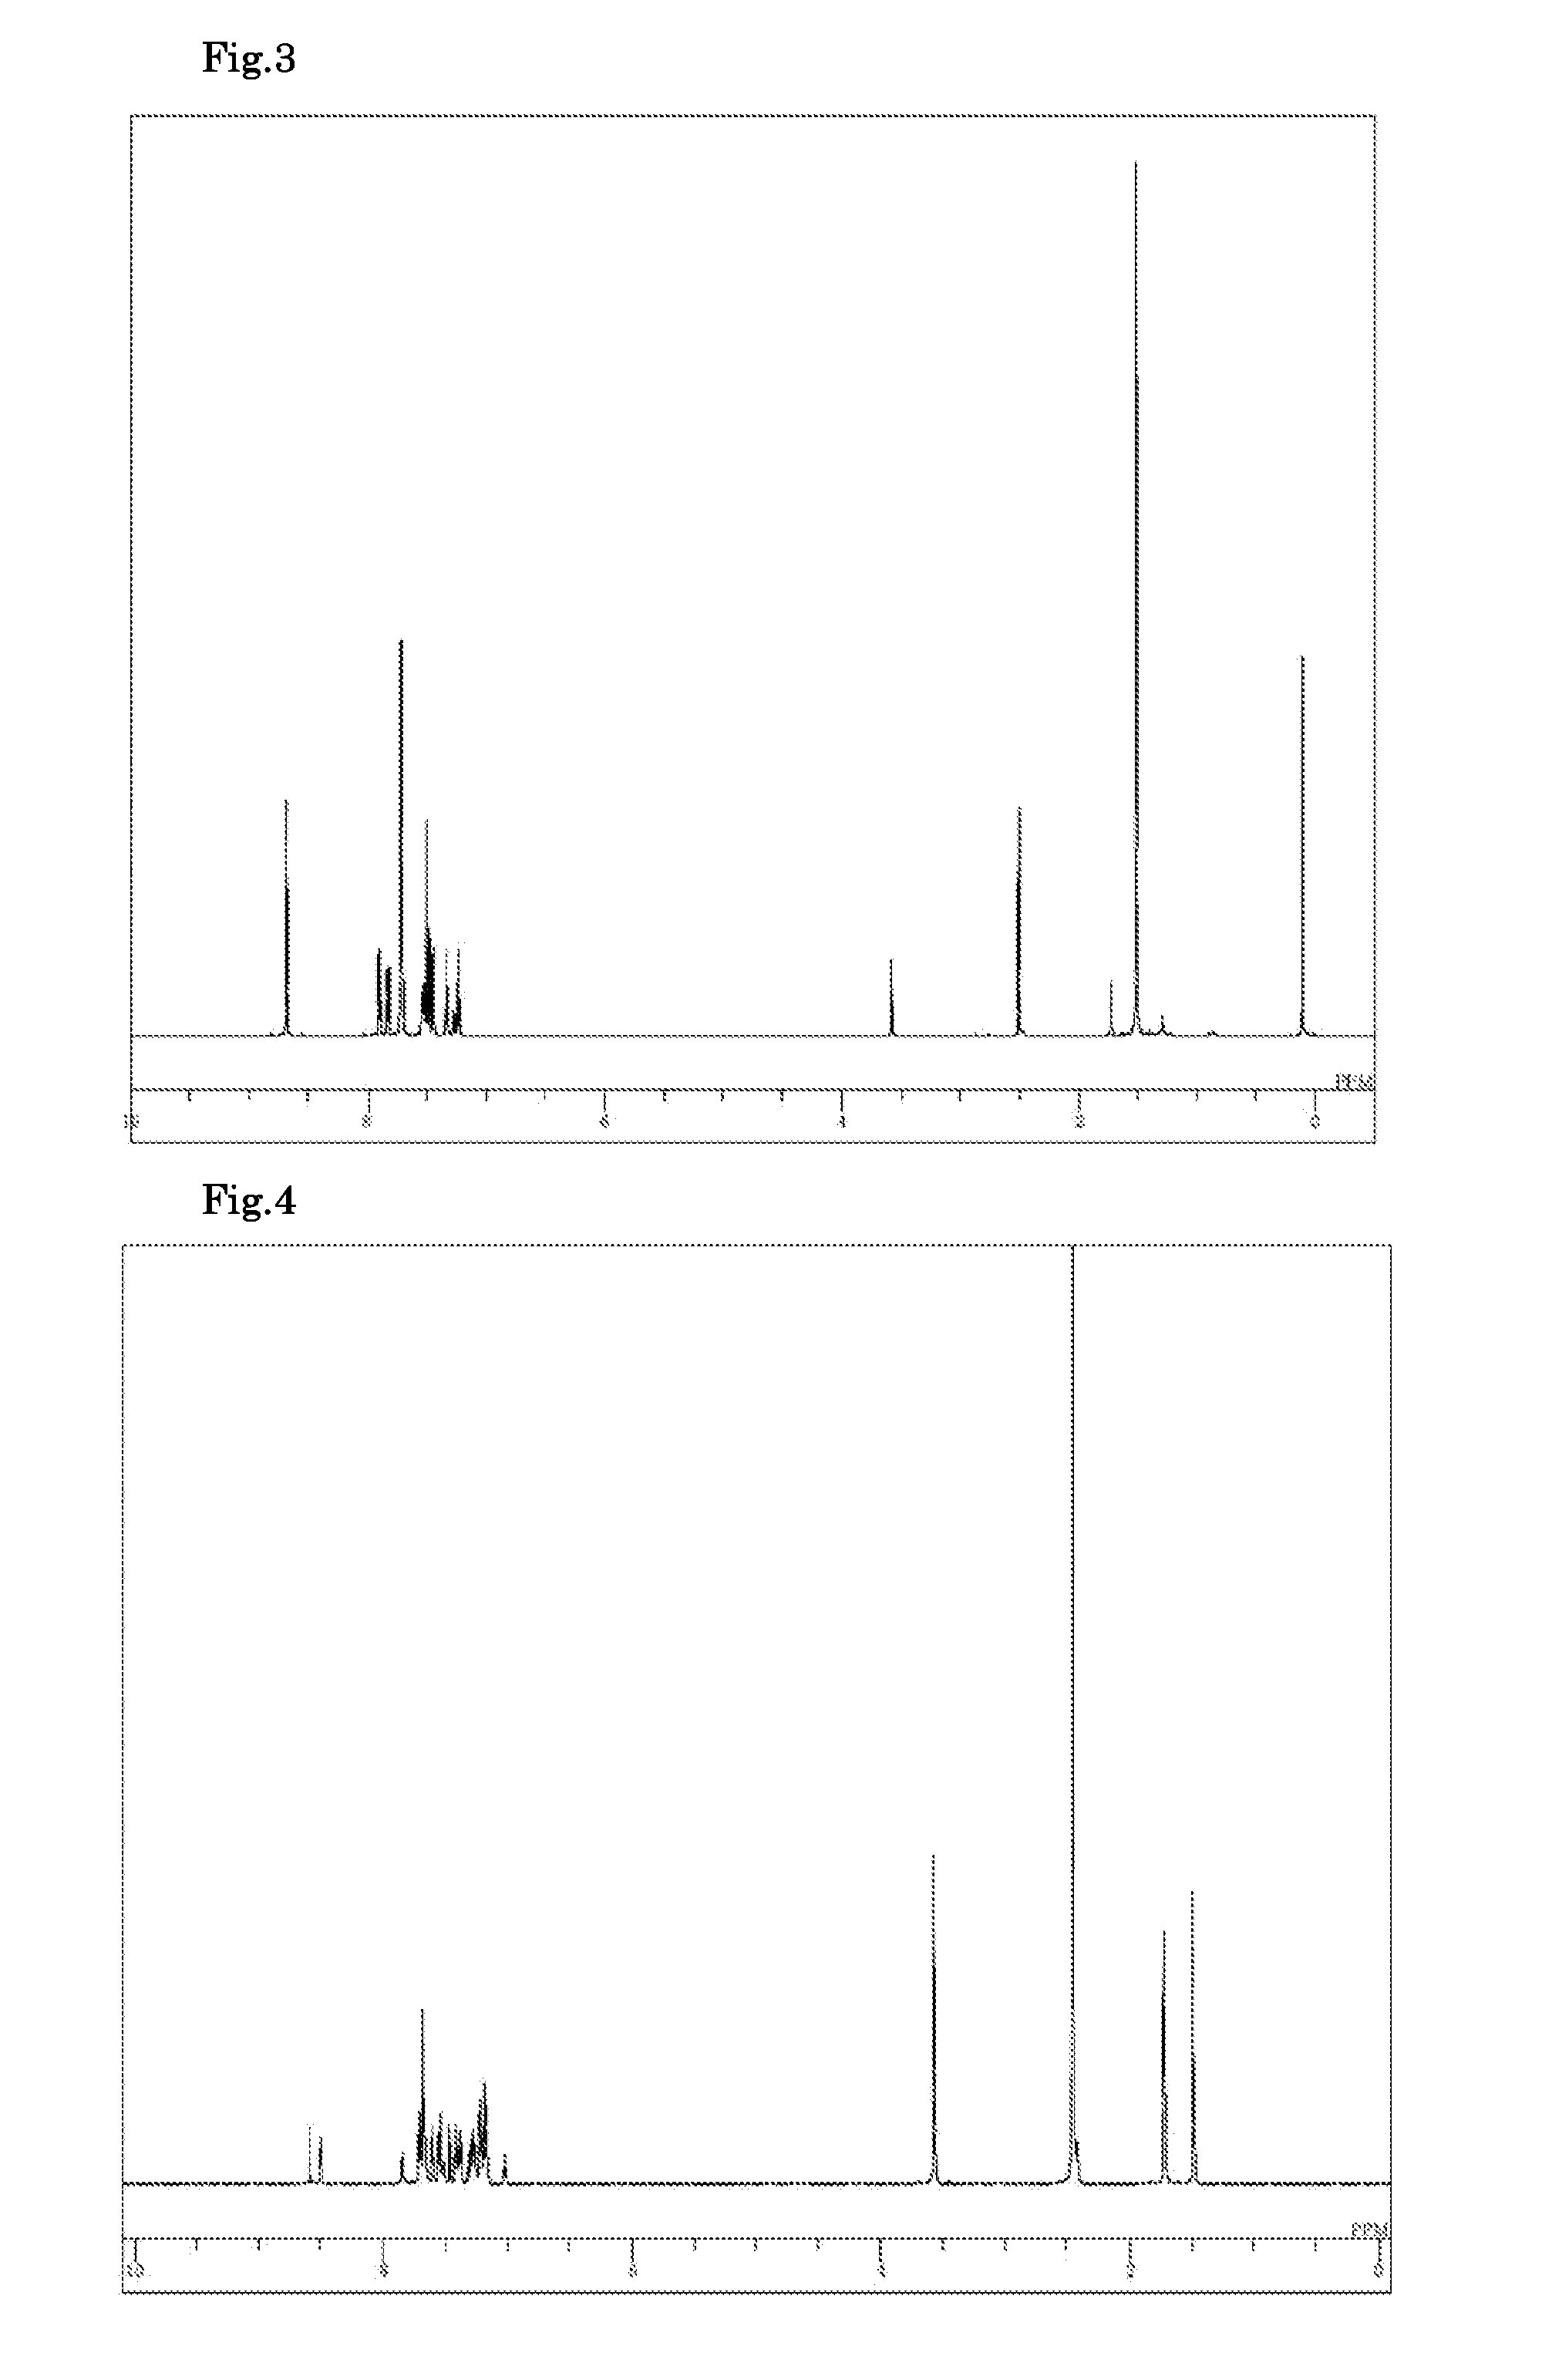 Compound having indenocarbazole ring structure, and organic electroluminescent device